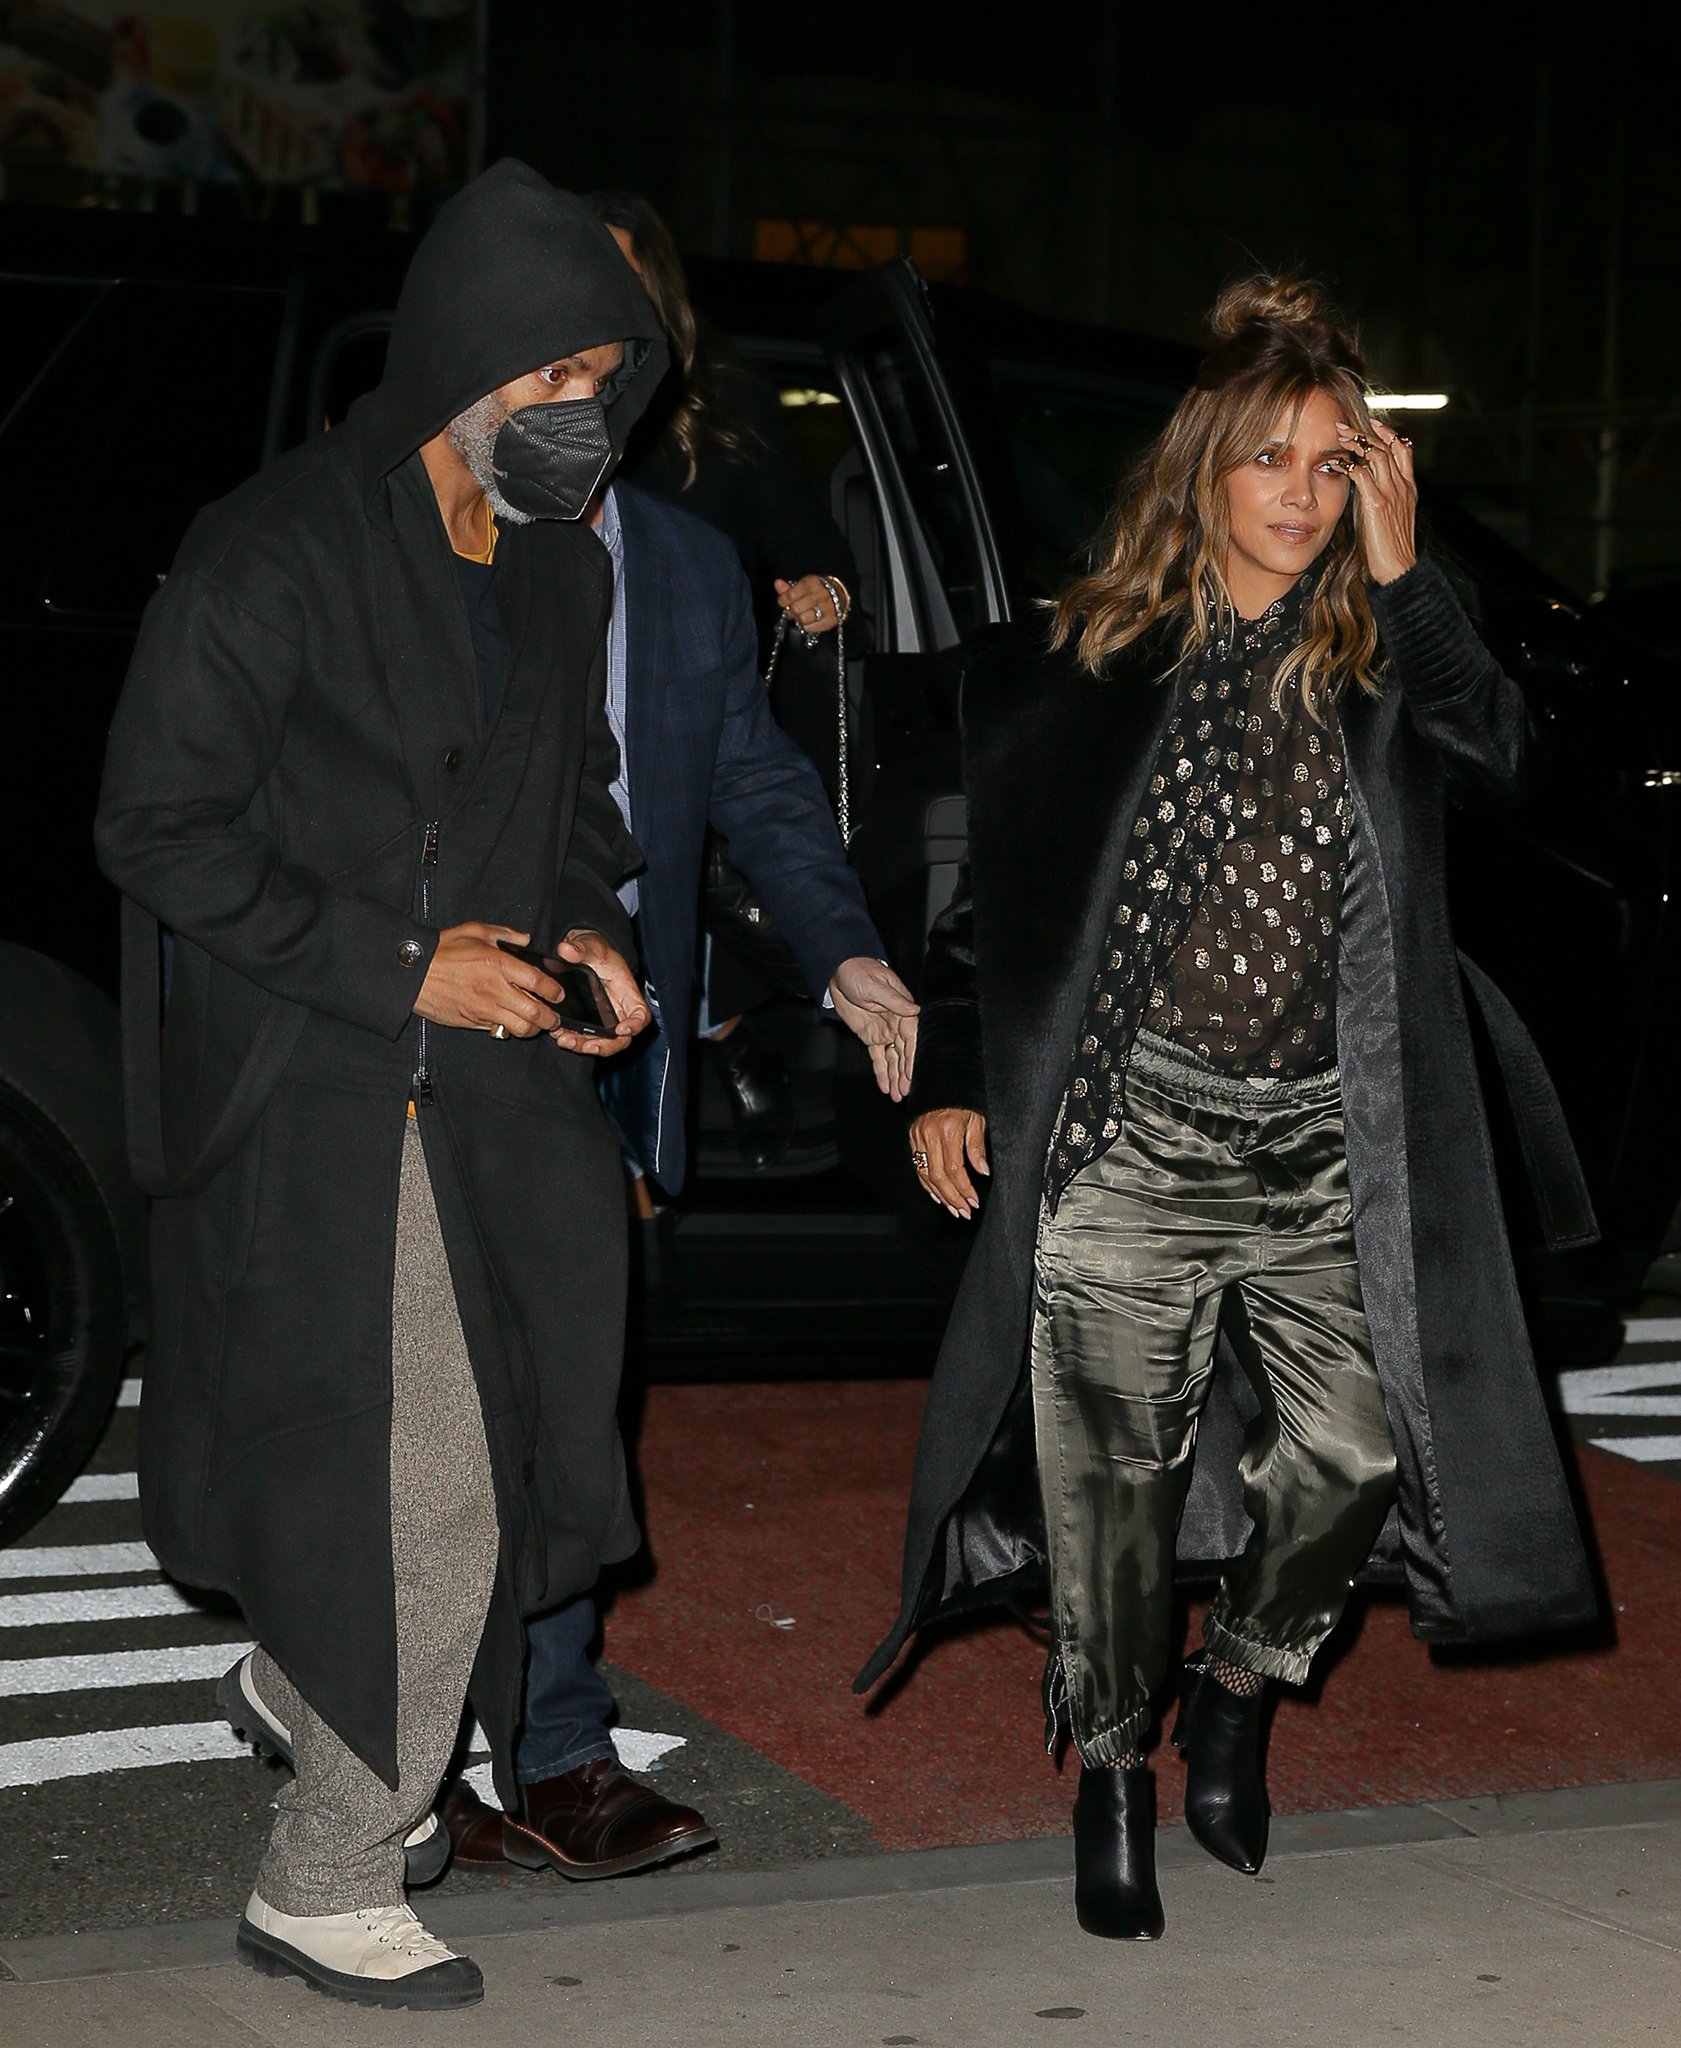 Van Hunt and girlfriend Halle Berry step out for a date night at the DGA Theater Complex in Midtown Manhattan